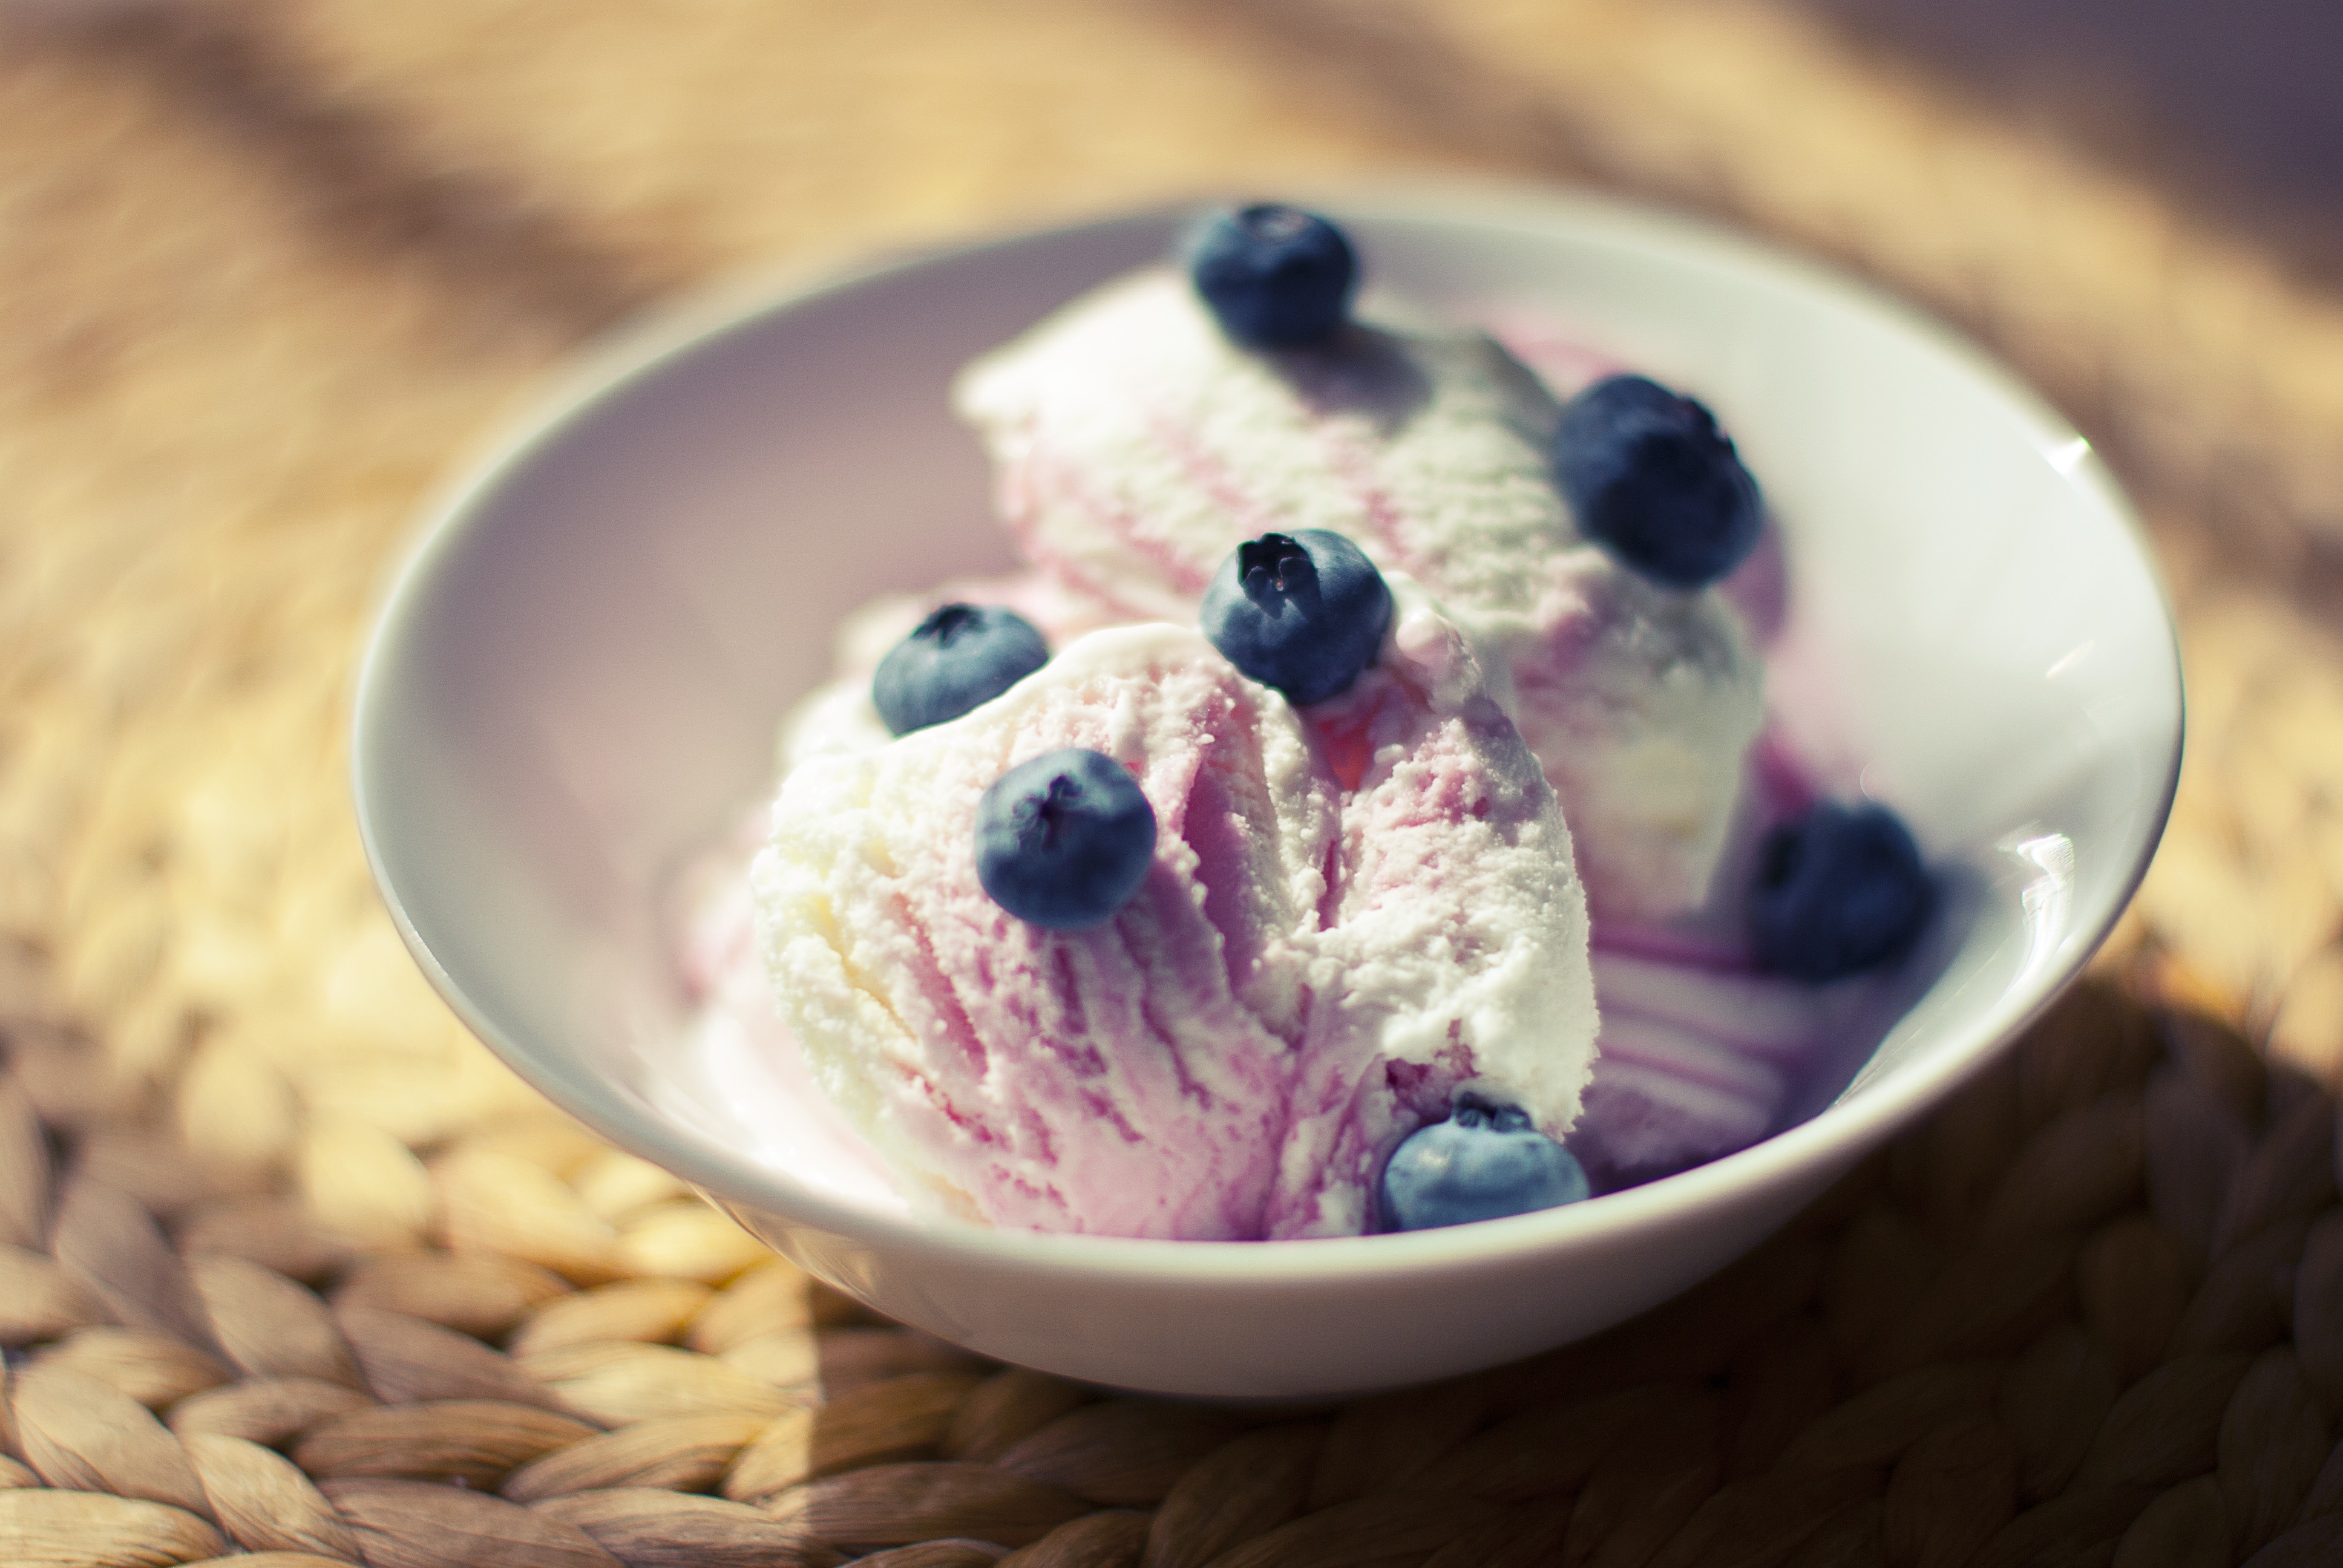 Ice Cream, Bowl, Dessert, Blueberries, food and drink, close-up